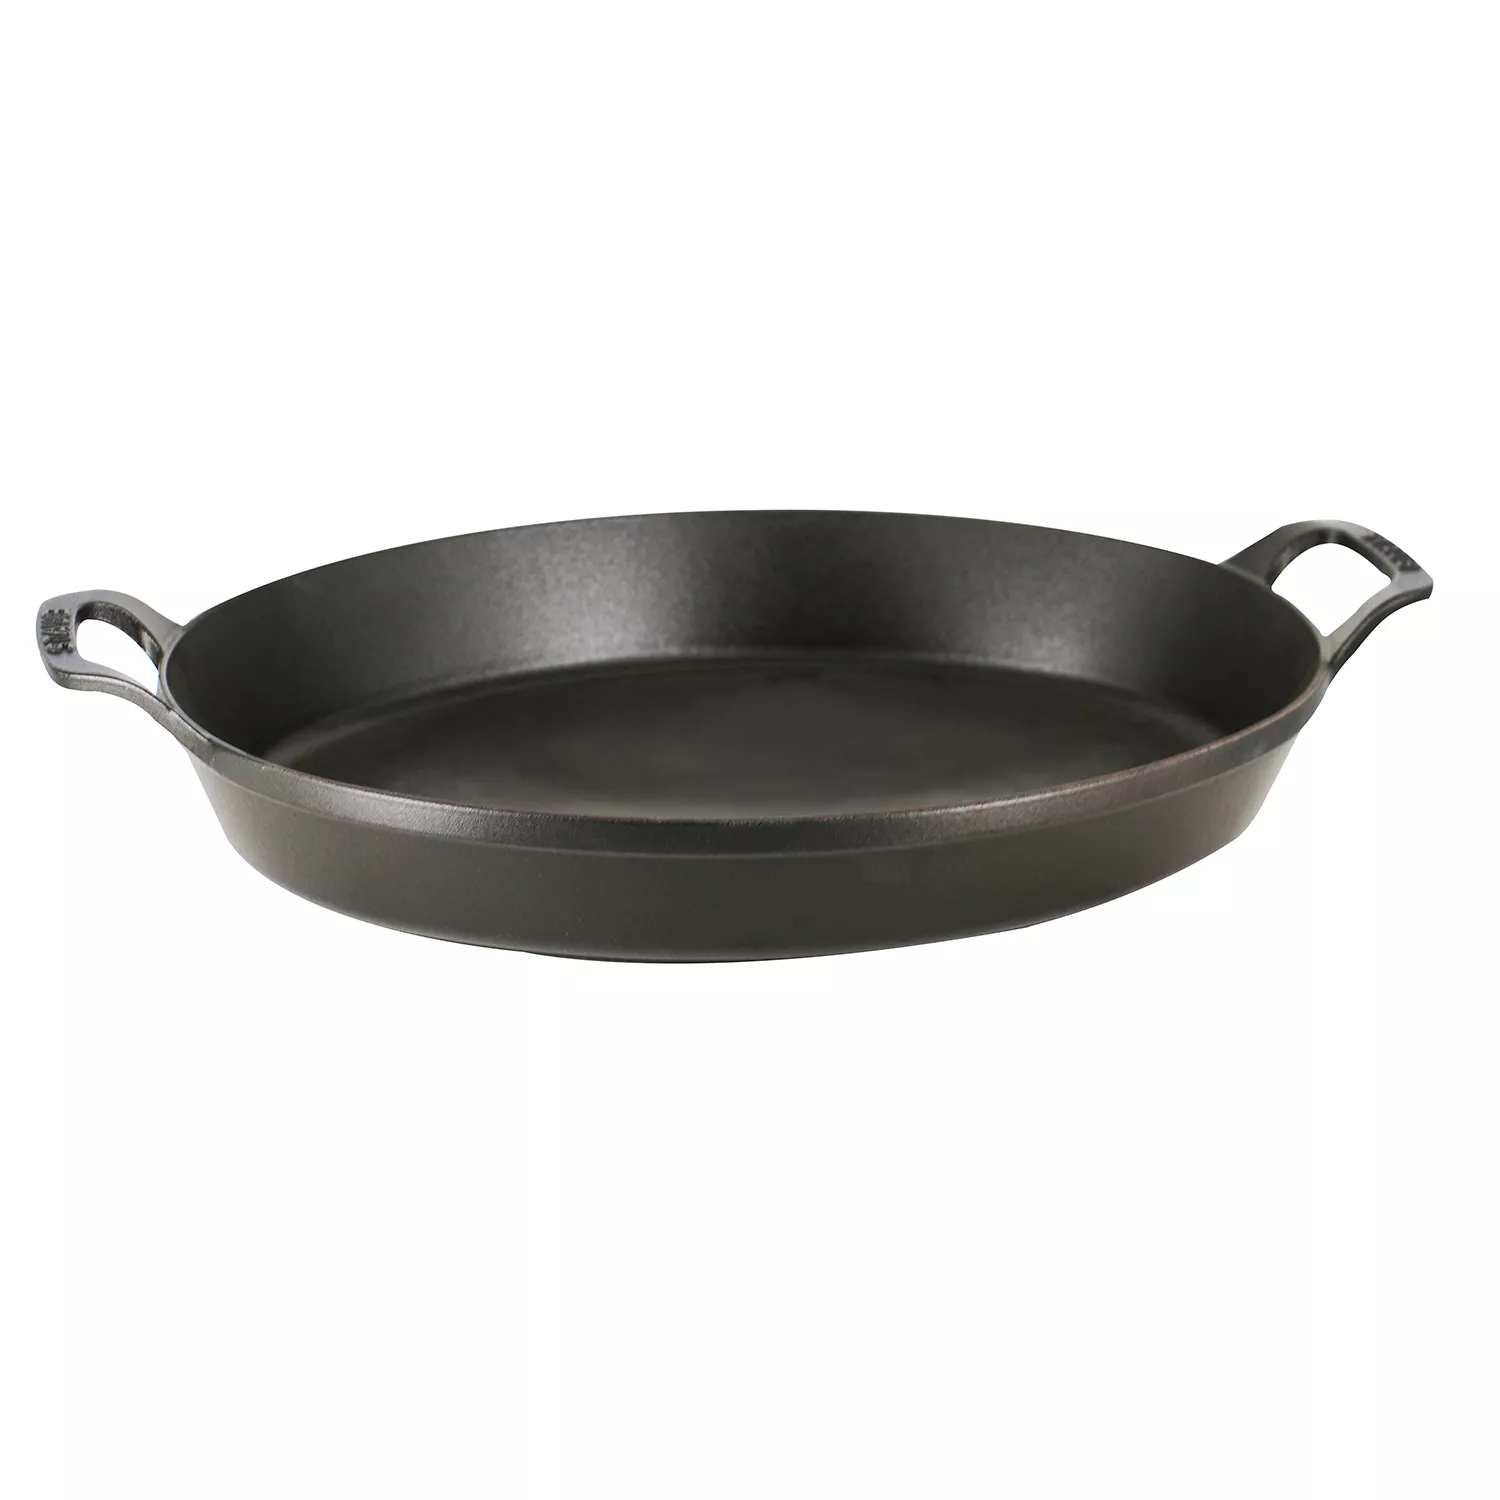 Staub Cast Iron 12-inch x 8-inch Roasting Pan - Matte Black, Made in France